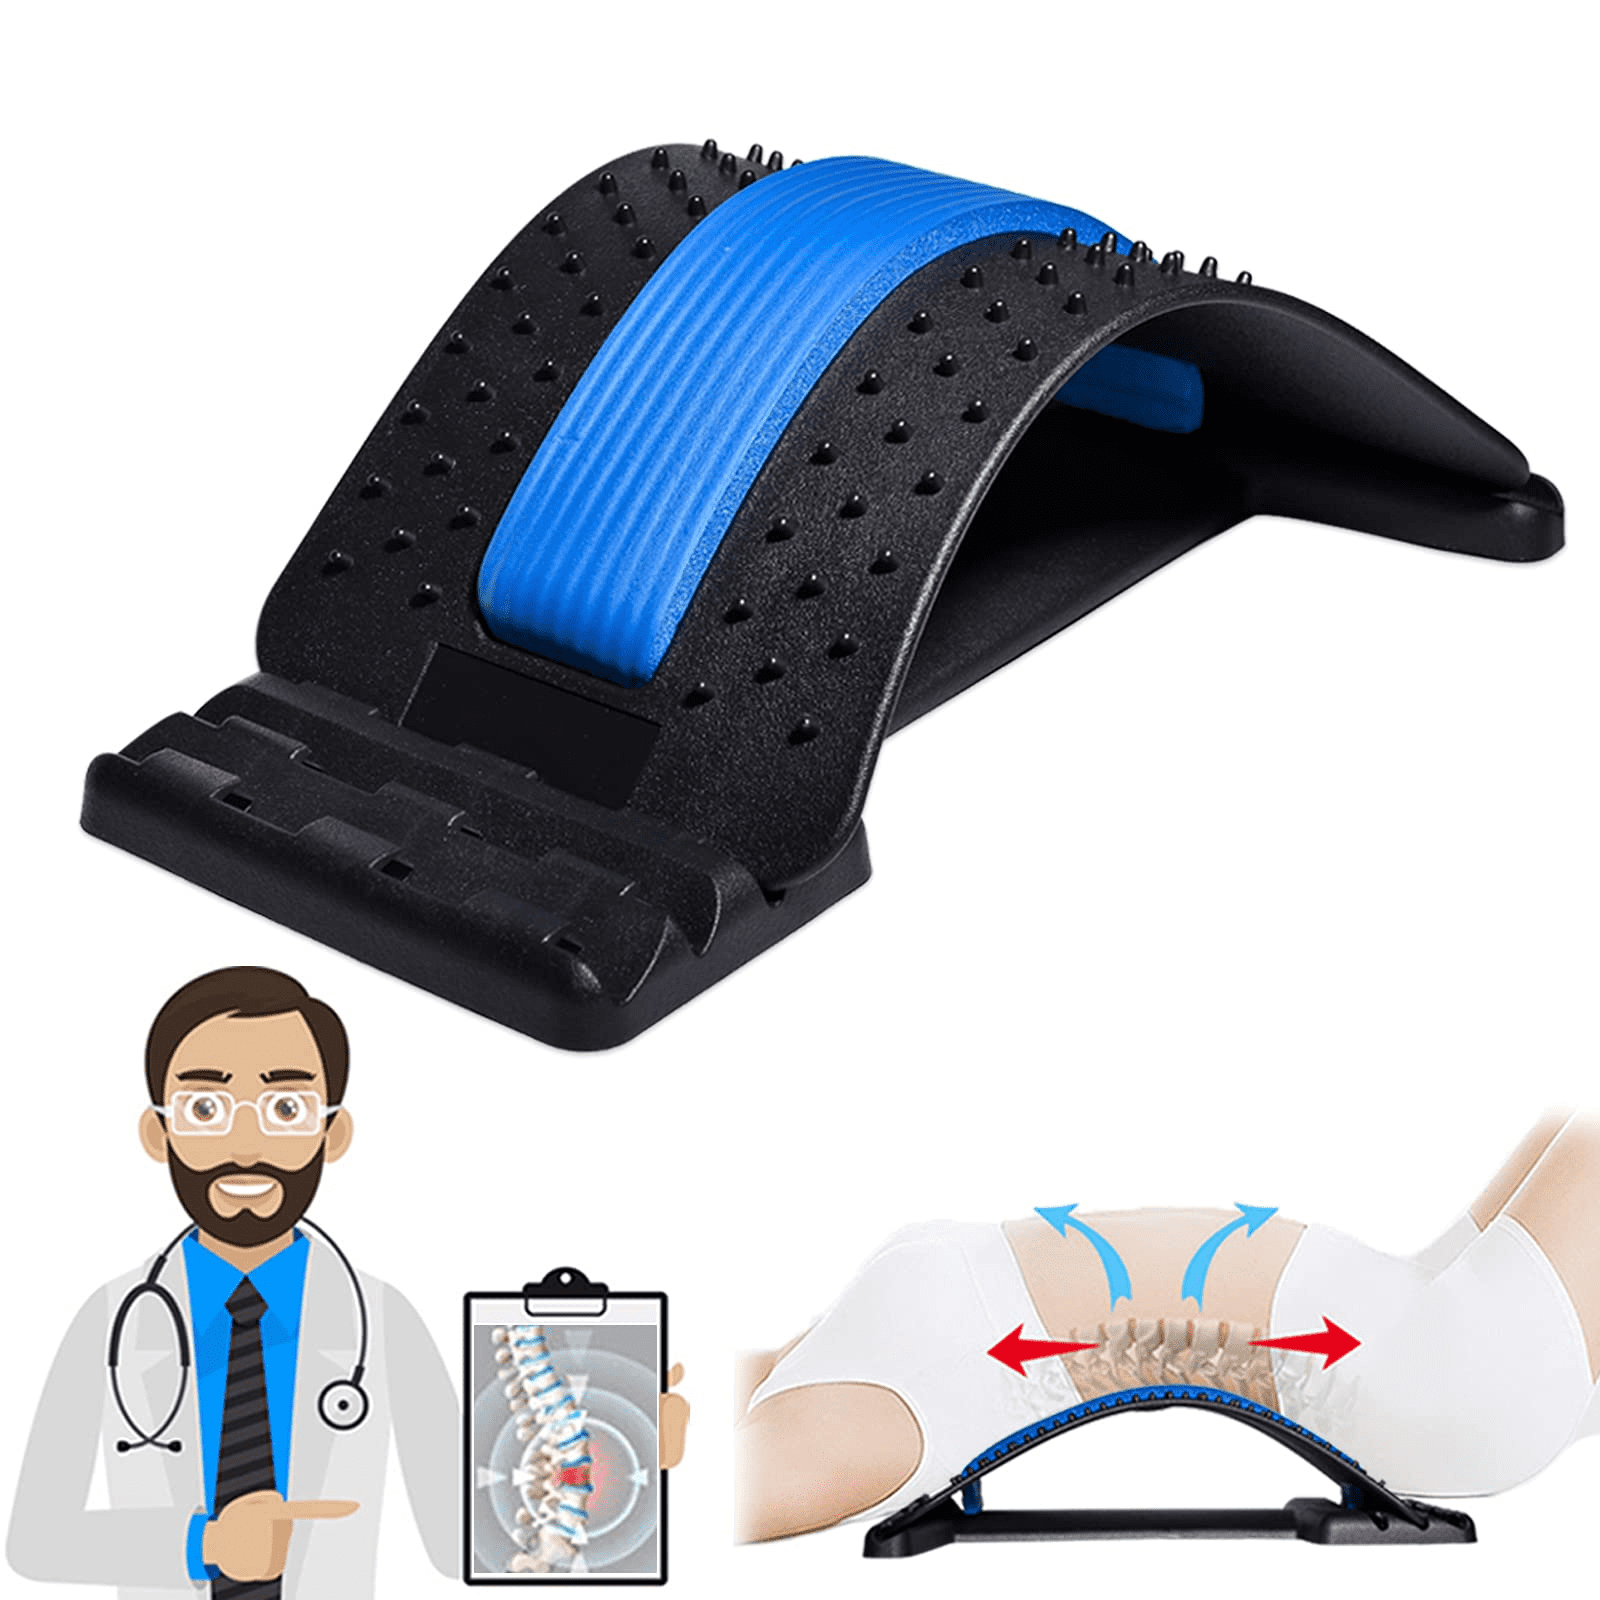 Lumbar Back Stretcher, Multi-Level Orthopedic Back Massager for herniated  disc, Scoliosis, Sciatica Pain Relief and Decompression - Black&Blue 